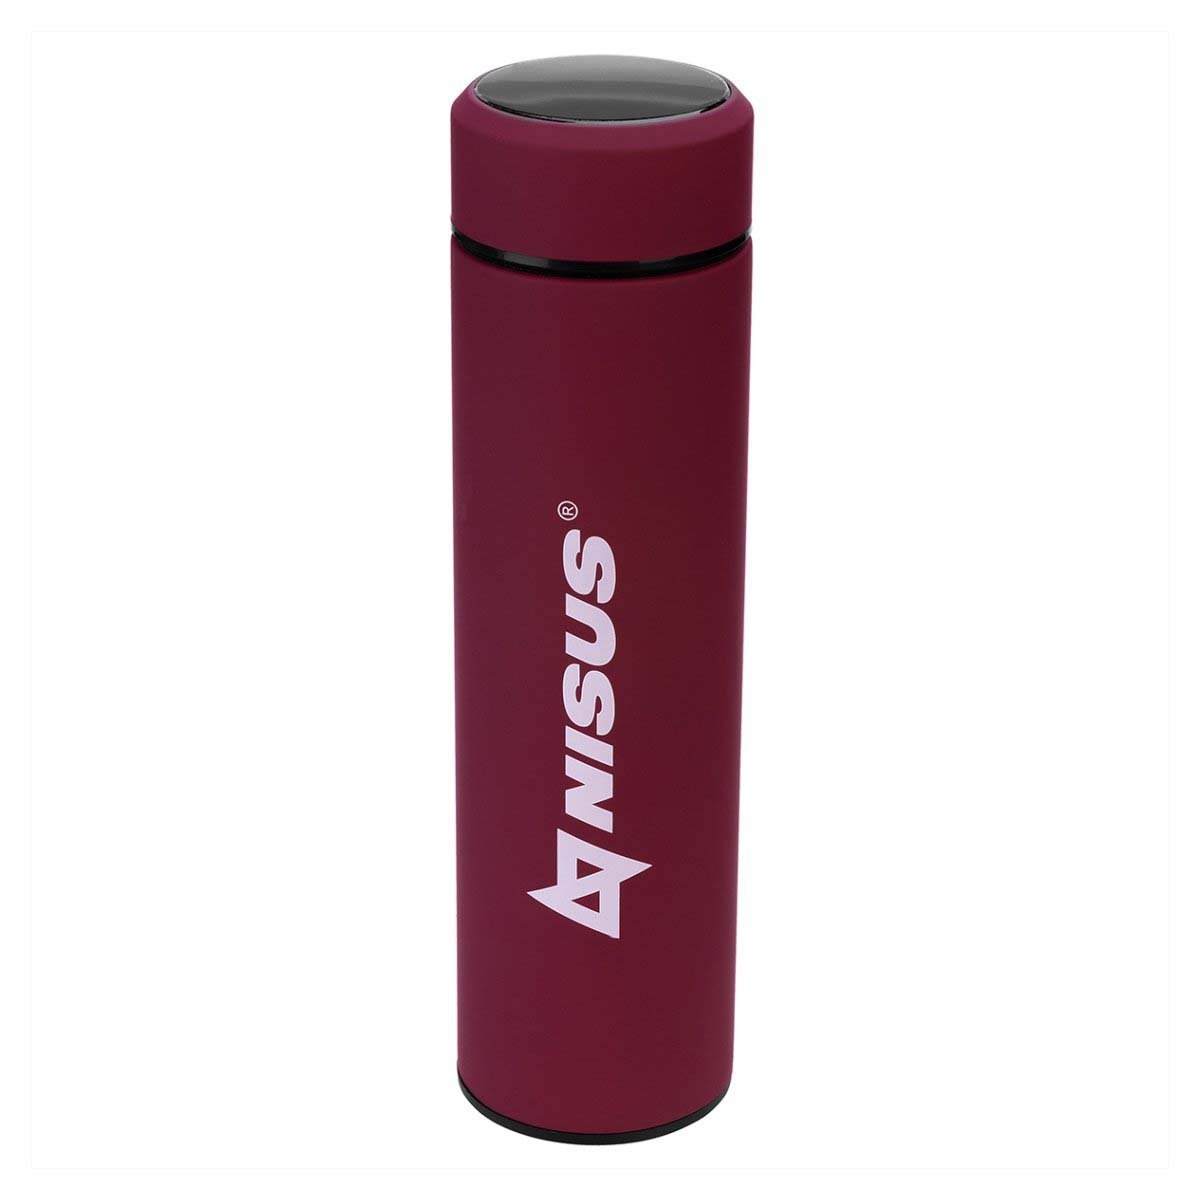 Stainless Insulated Water Bottle with LED Temperature Display, 15 oz, red